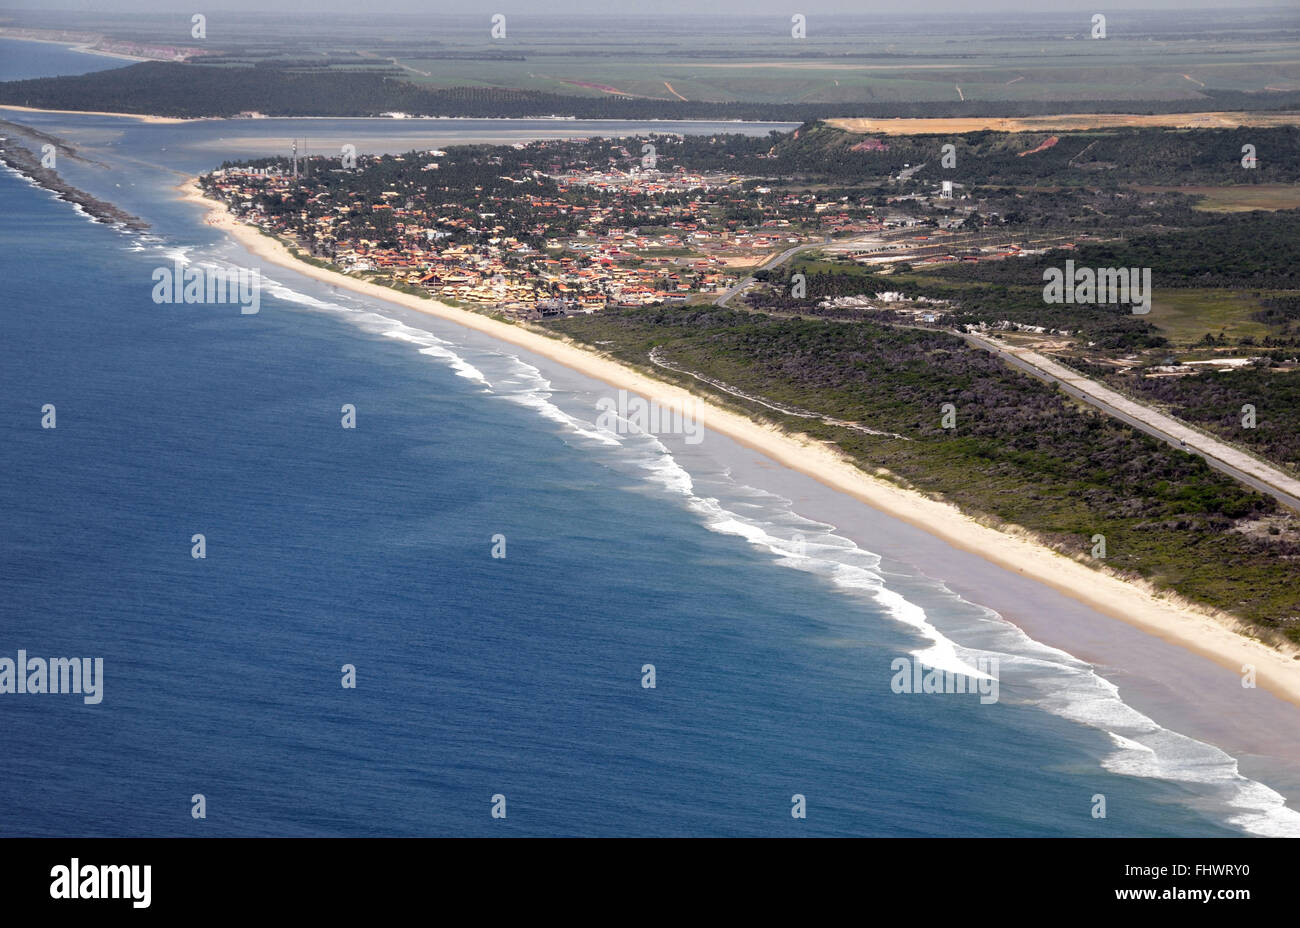 View of the town of Barra de Sao Miguel - Niquim lies between the River and the Atlantic Ocean Stock Photo